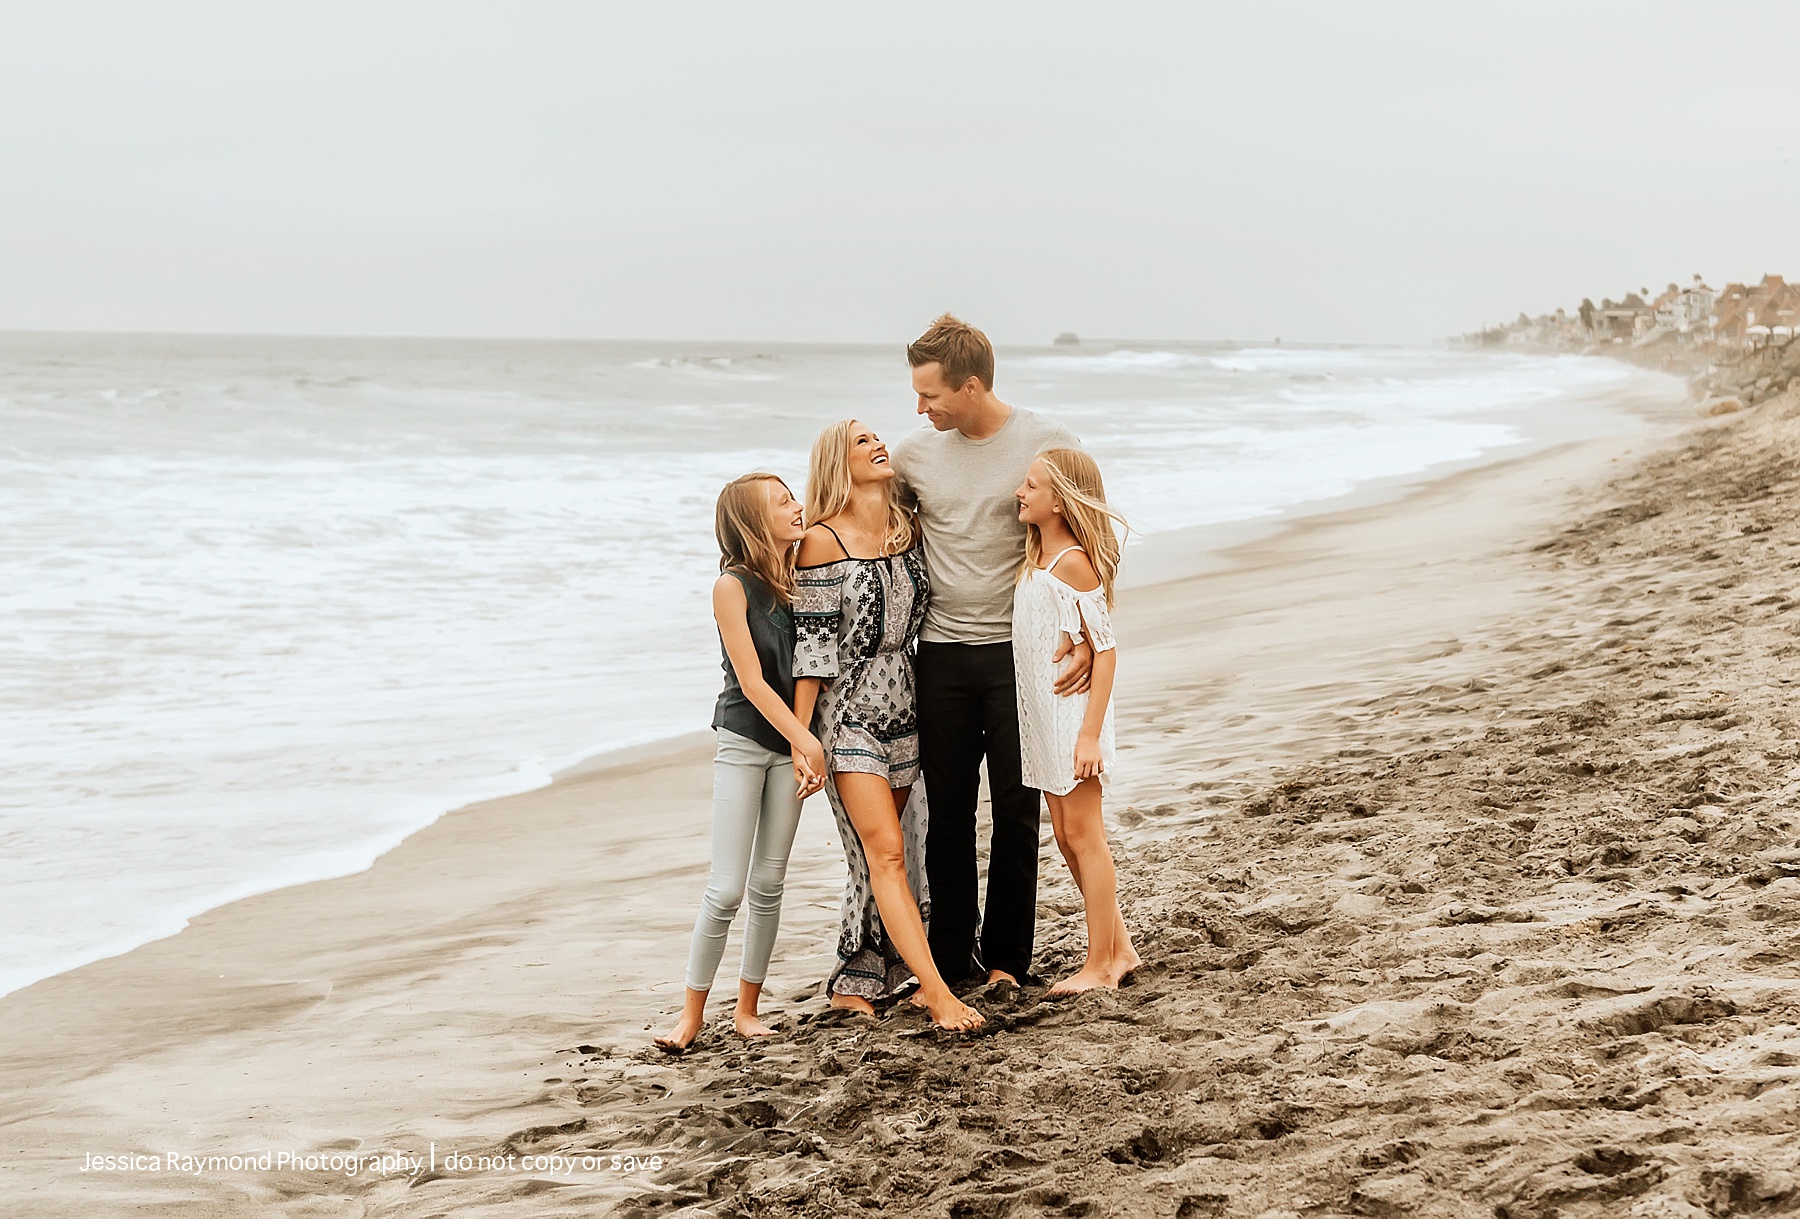 What to Wear for Your Hawaii Family Portrait Beach Session